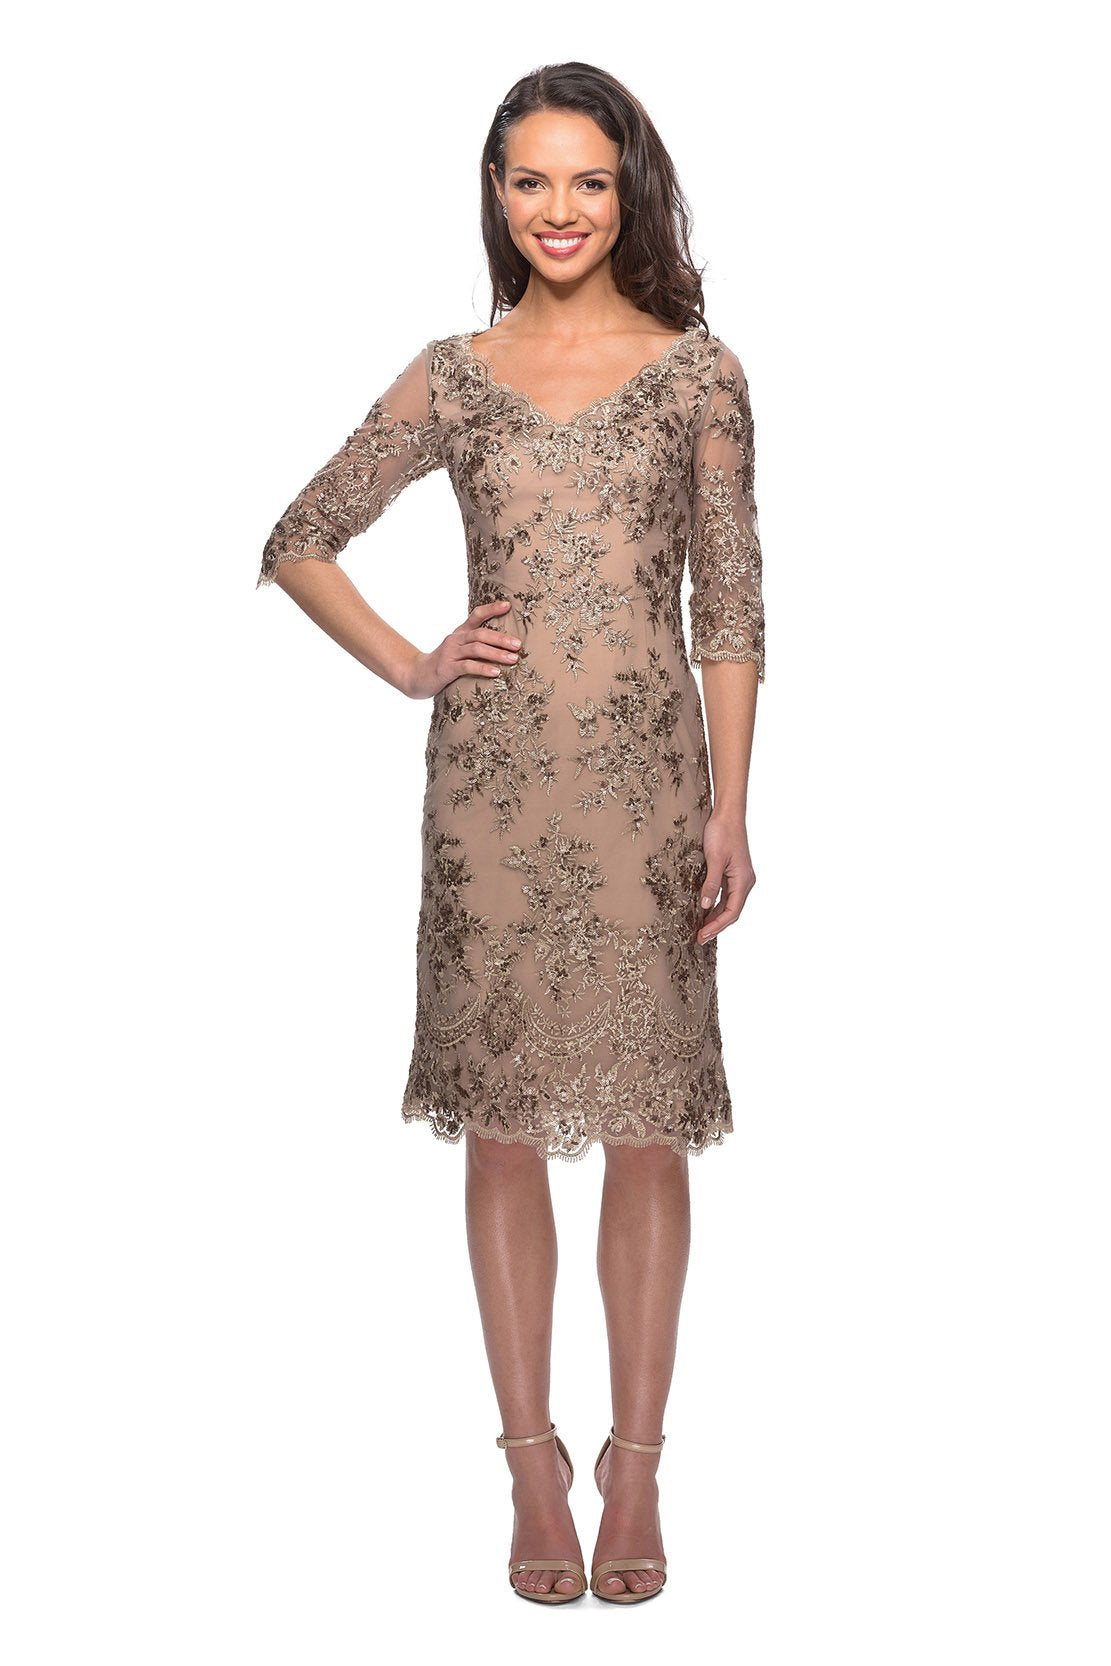 La Femme - Knee Length Quarter Sleeve Embroidered Dress 26871 In Gold and Neutral